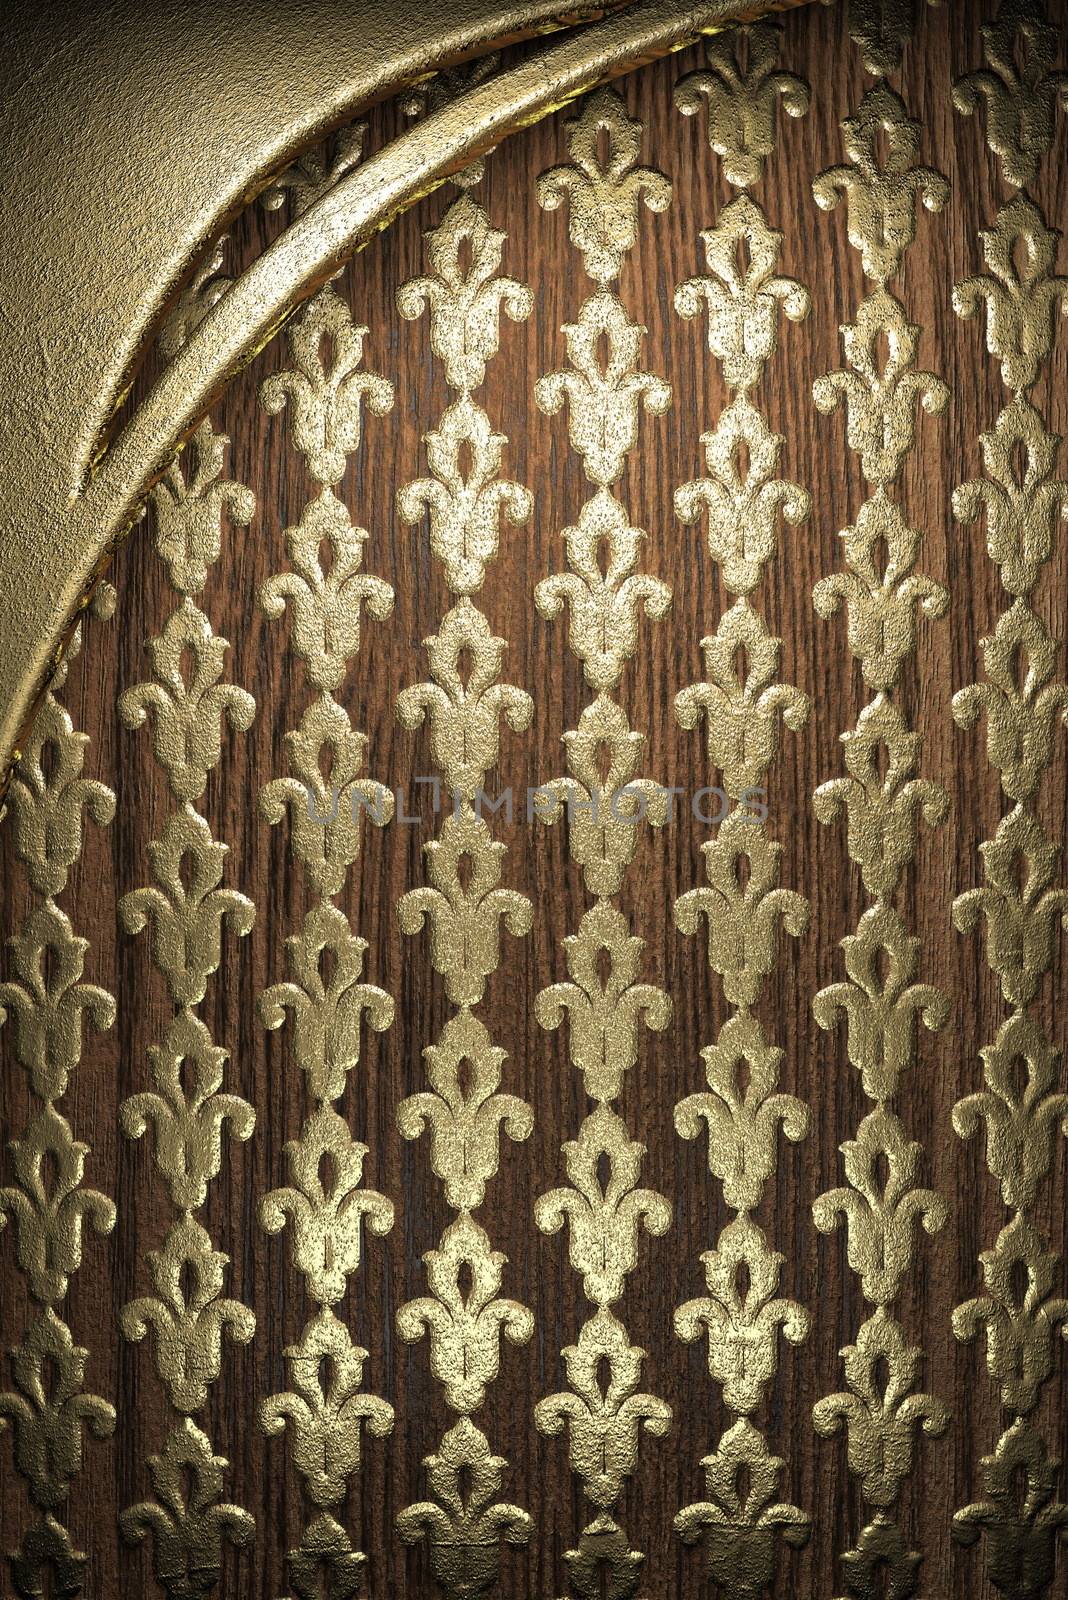 gold on wood background by videodoctor